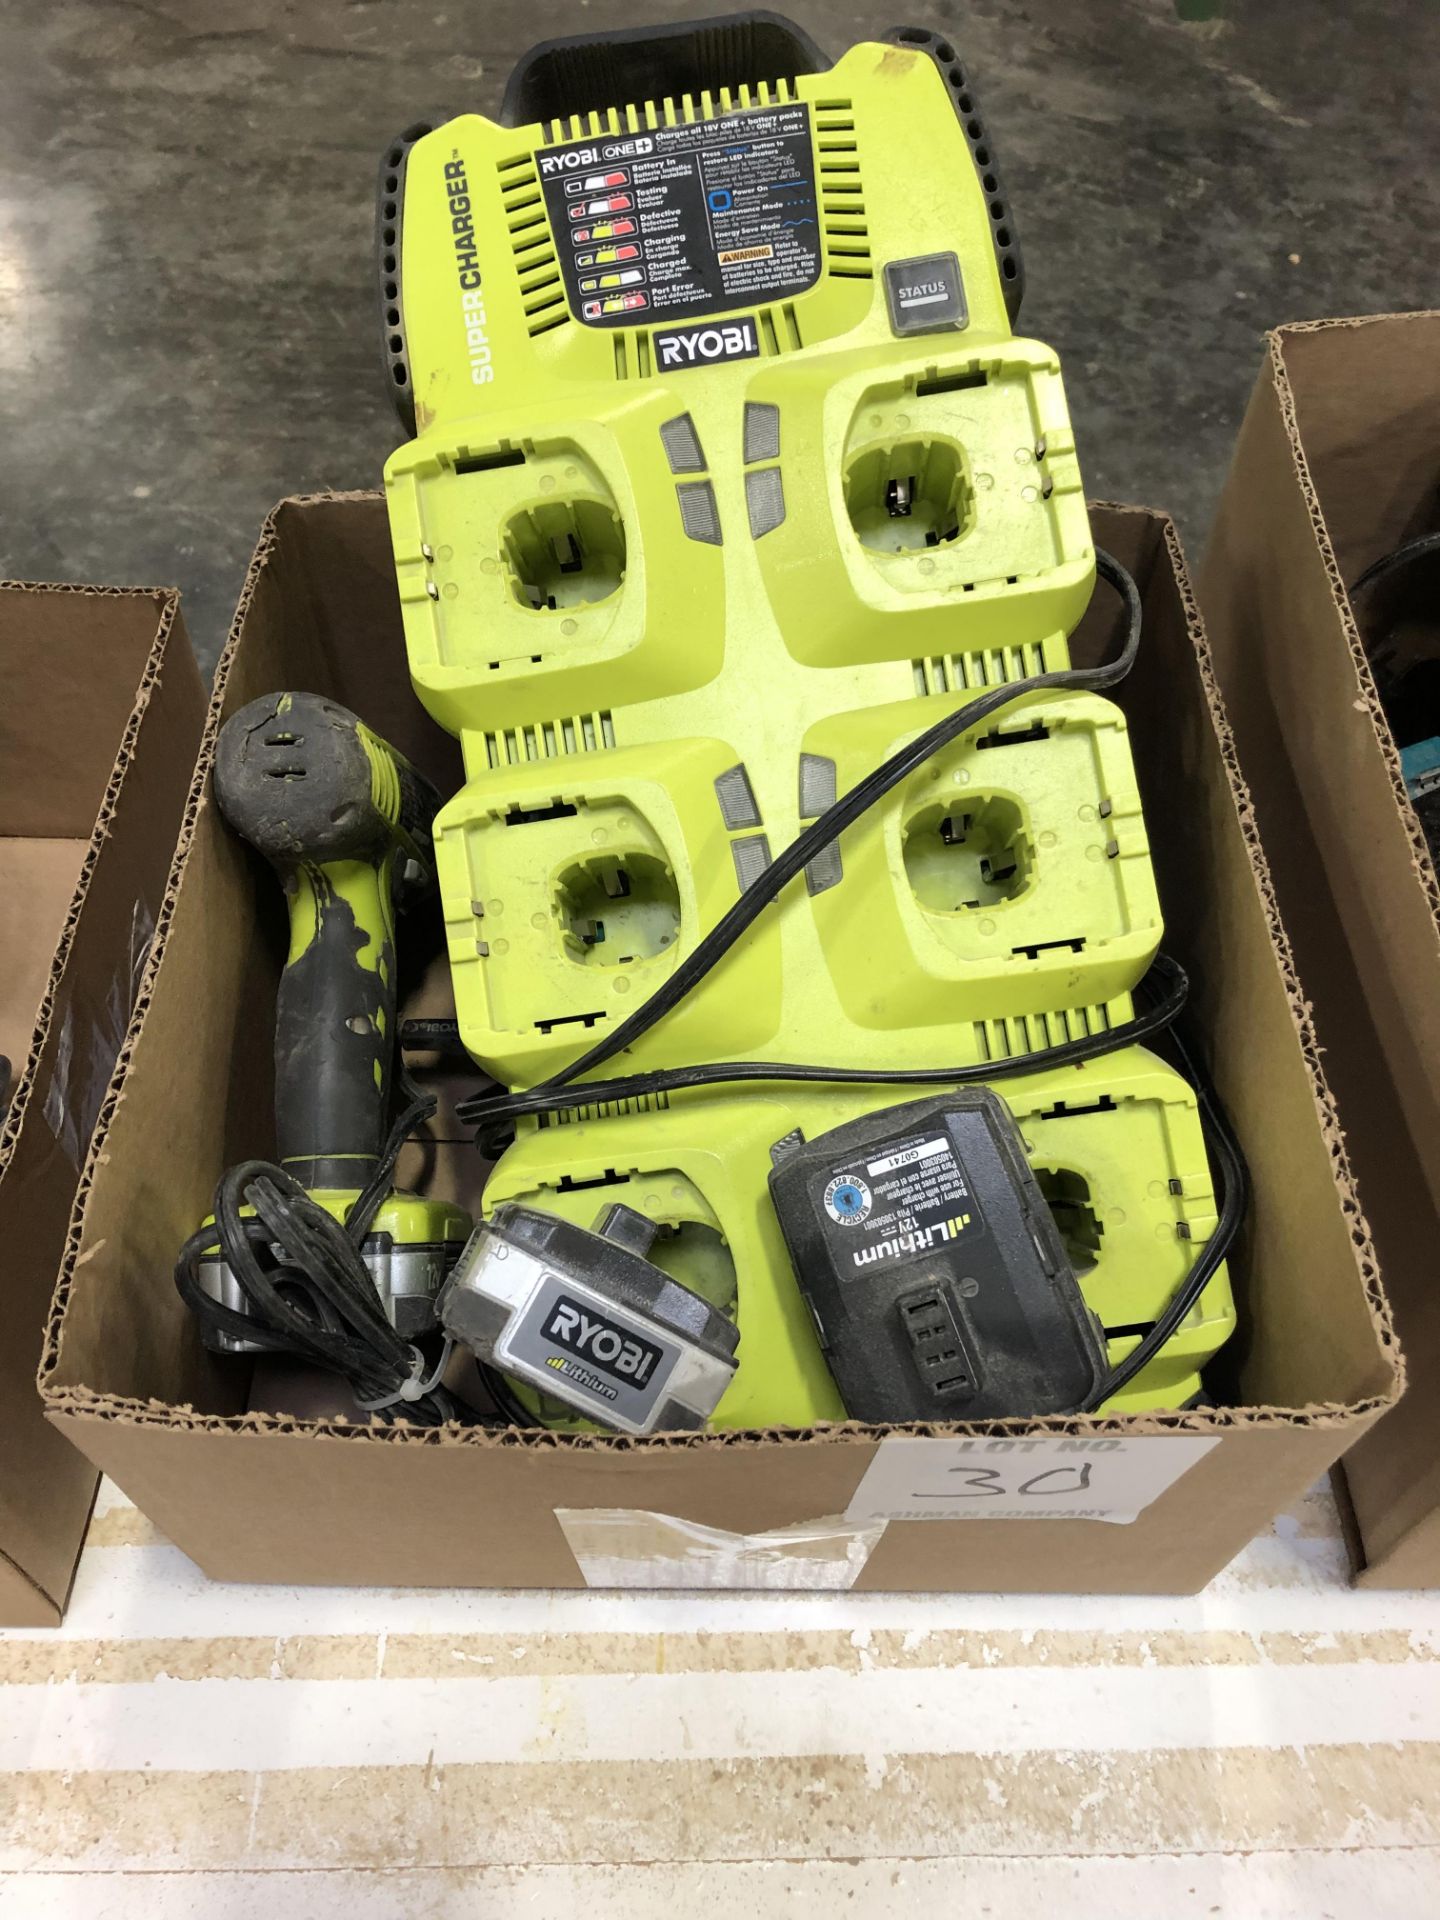 Lot: Ryobi Electric Drill & Chargers